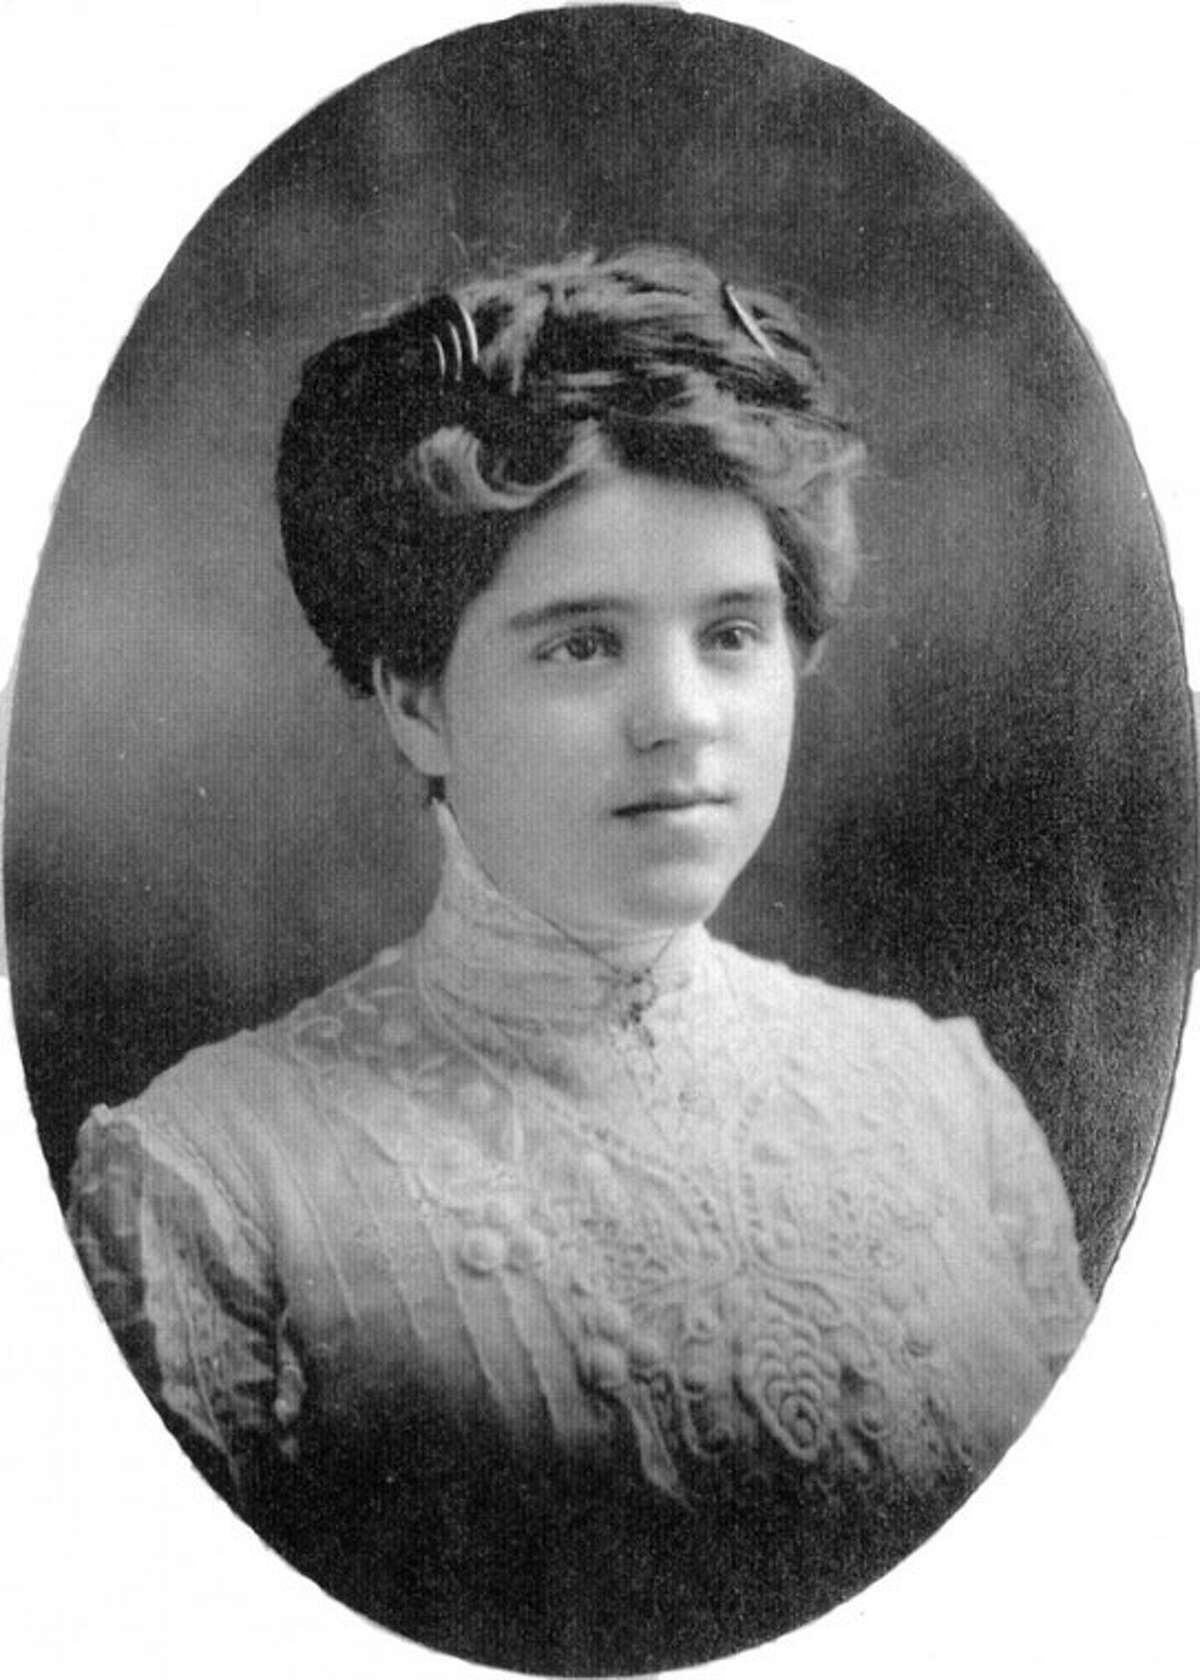 Bessie Belle Smith, mother of Vera, Ken and Edwin, once remarked “They weren’t really happy with me the first few weeks.” A little later her father-in-law Fred told R.D. that “it was the smartest thing you ever did.”